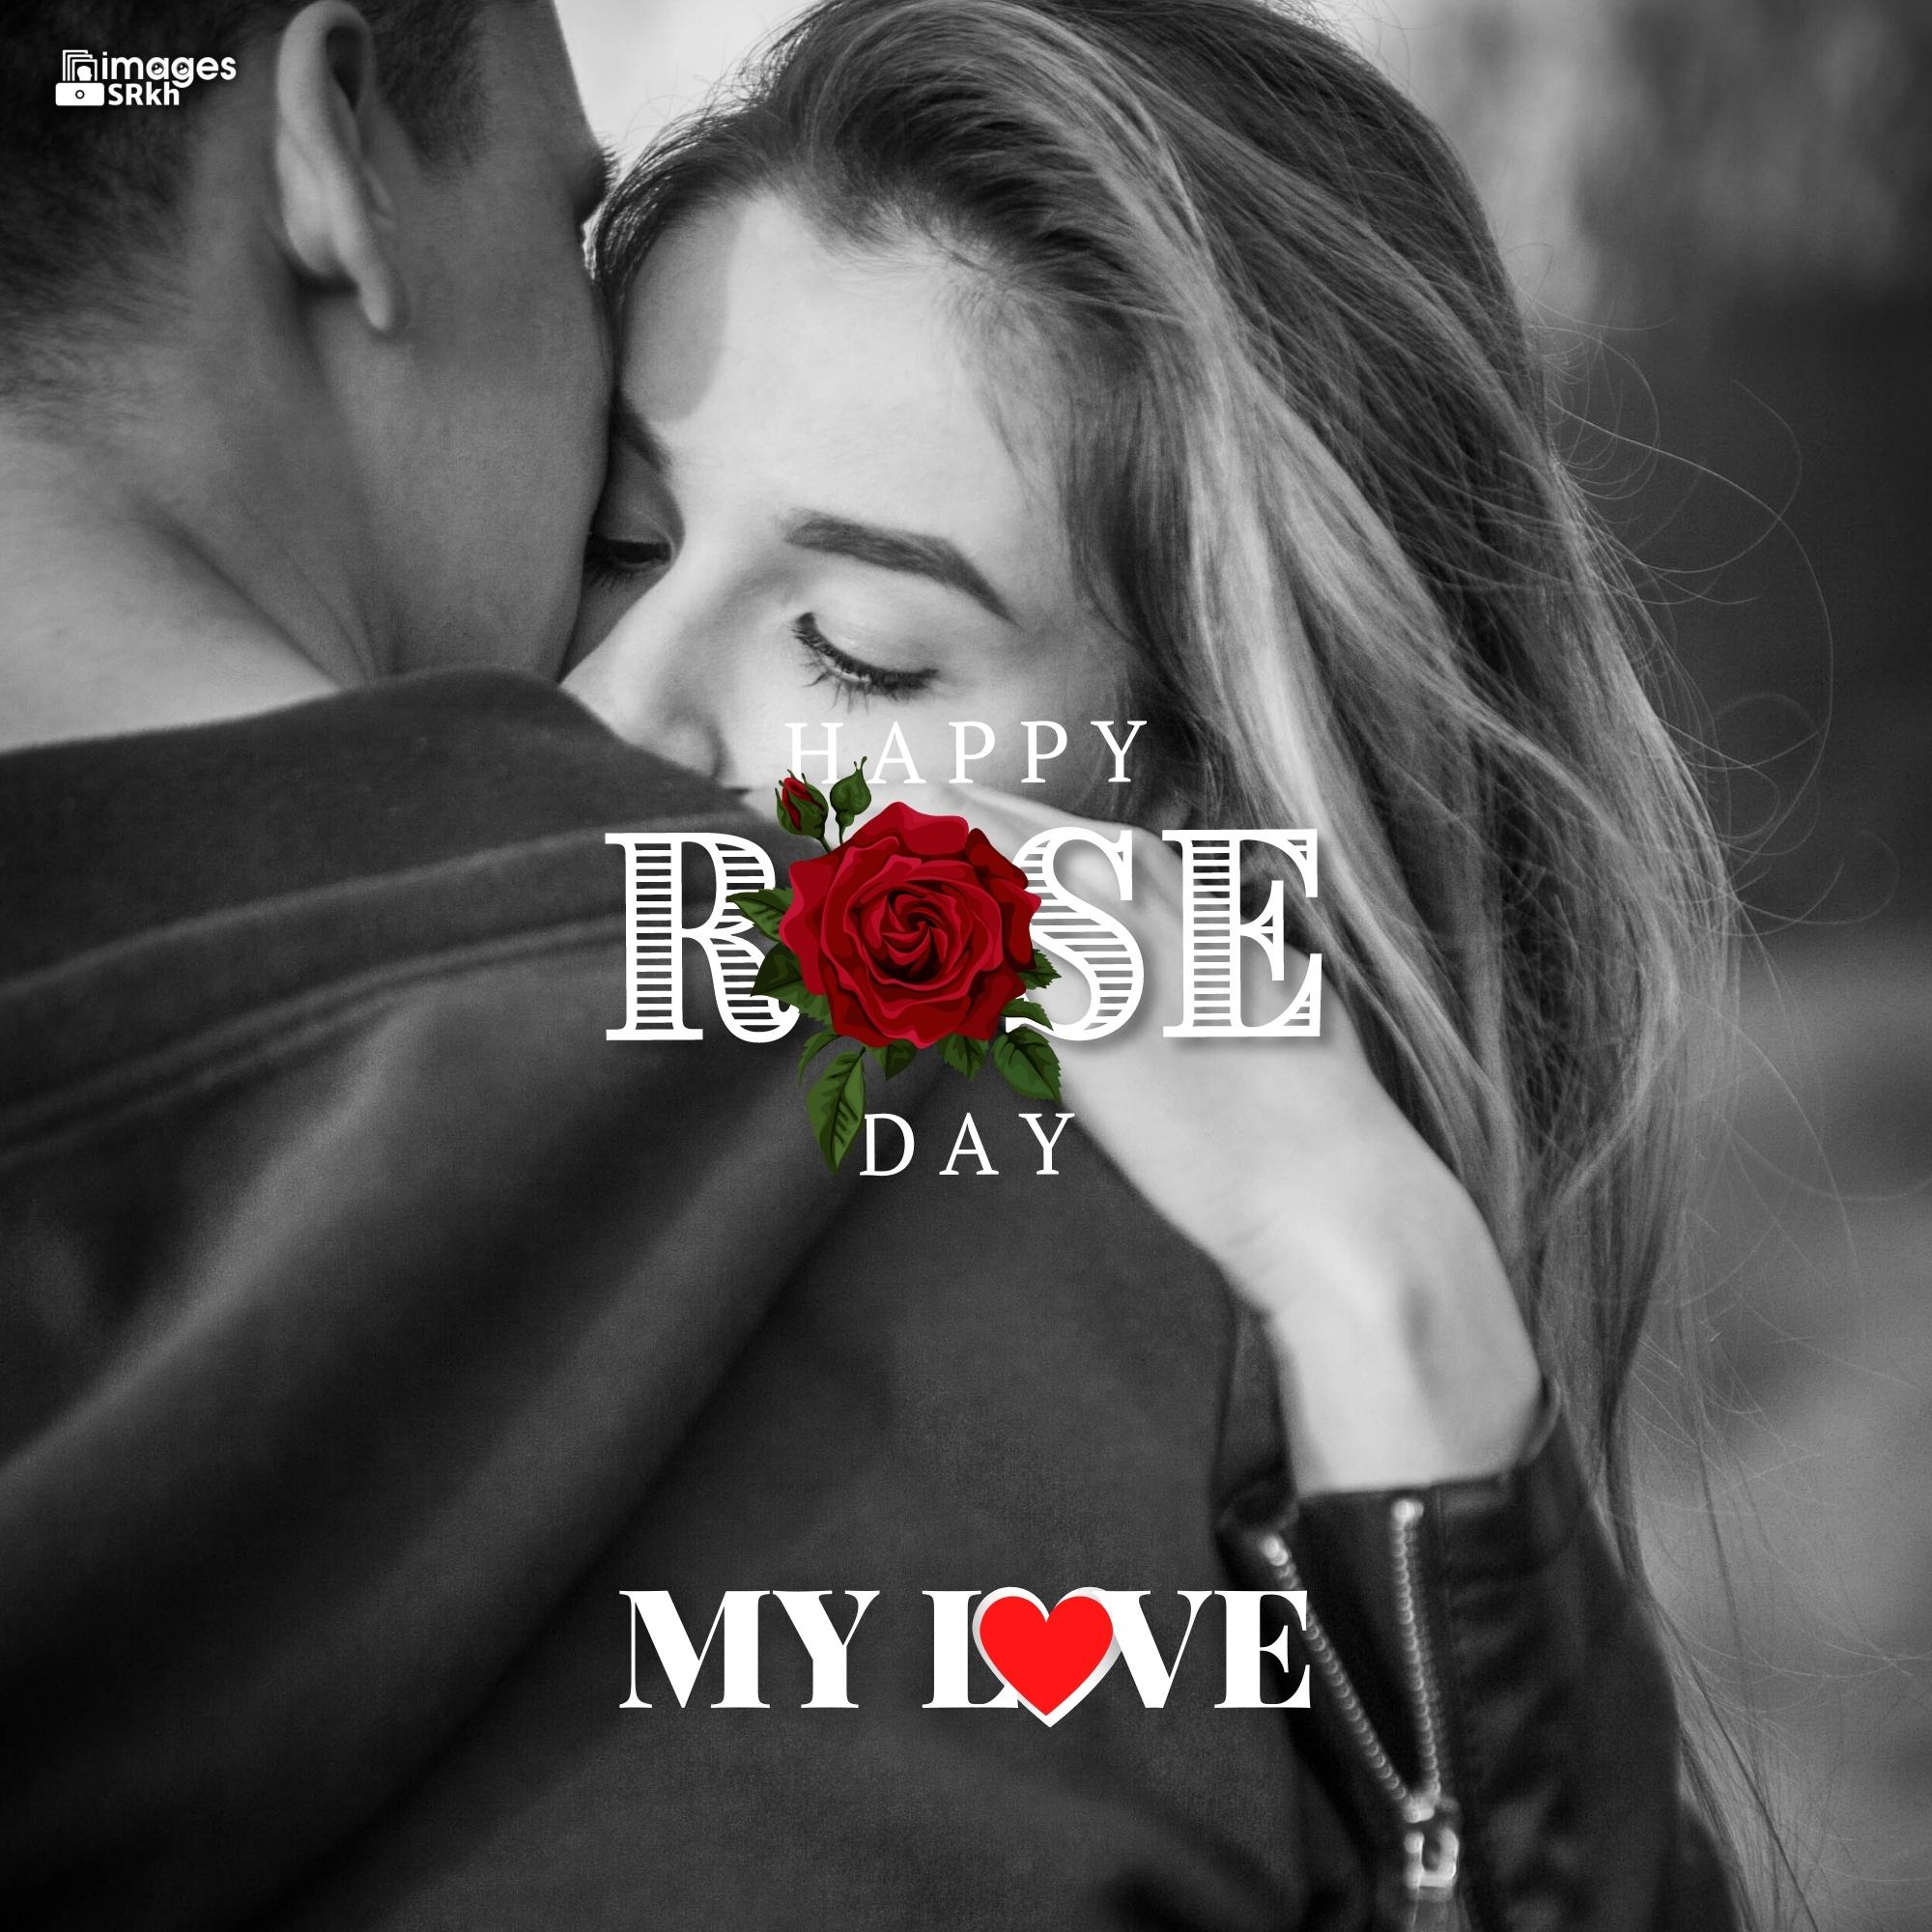 Happy Rose Day My Love (19) | HD IMAGES